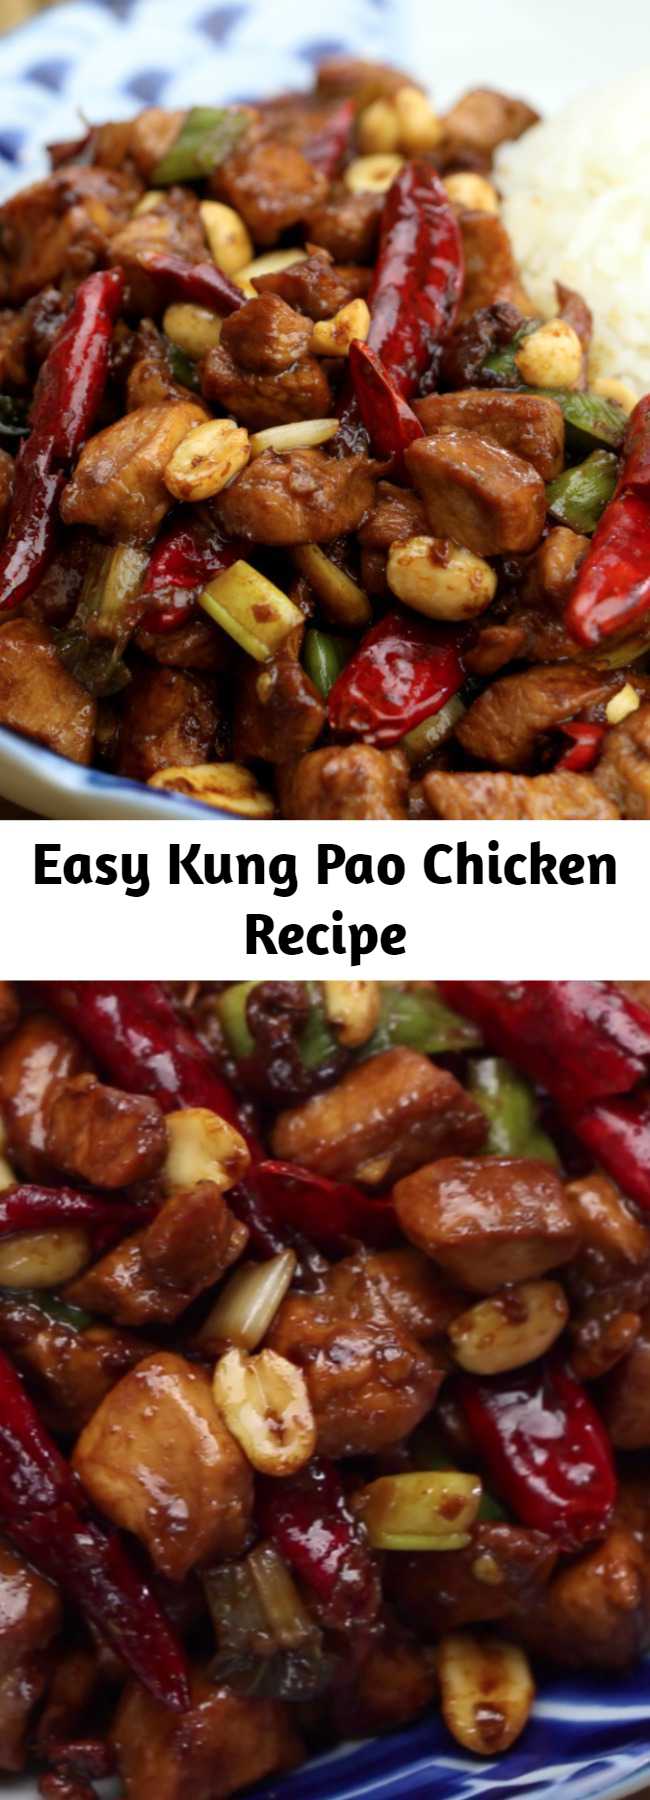 Easy Kung Pao Chicken Recipe - Spicy, sweet and incredibly delicious chicken with peanuts!